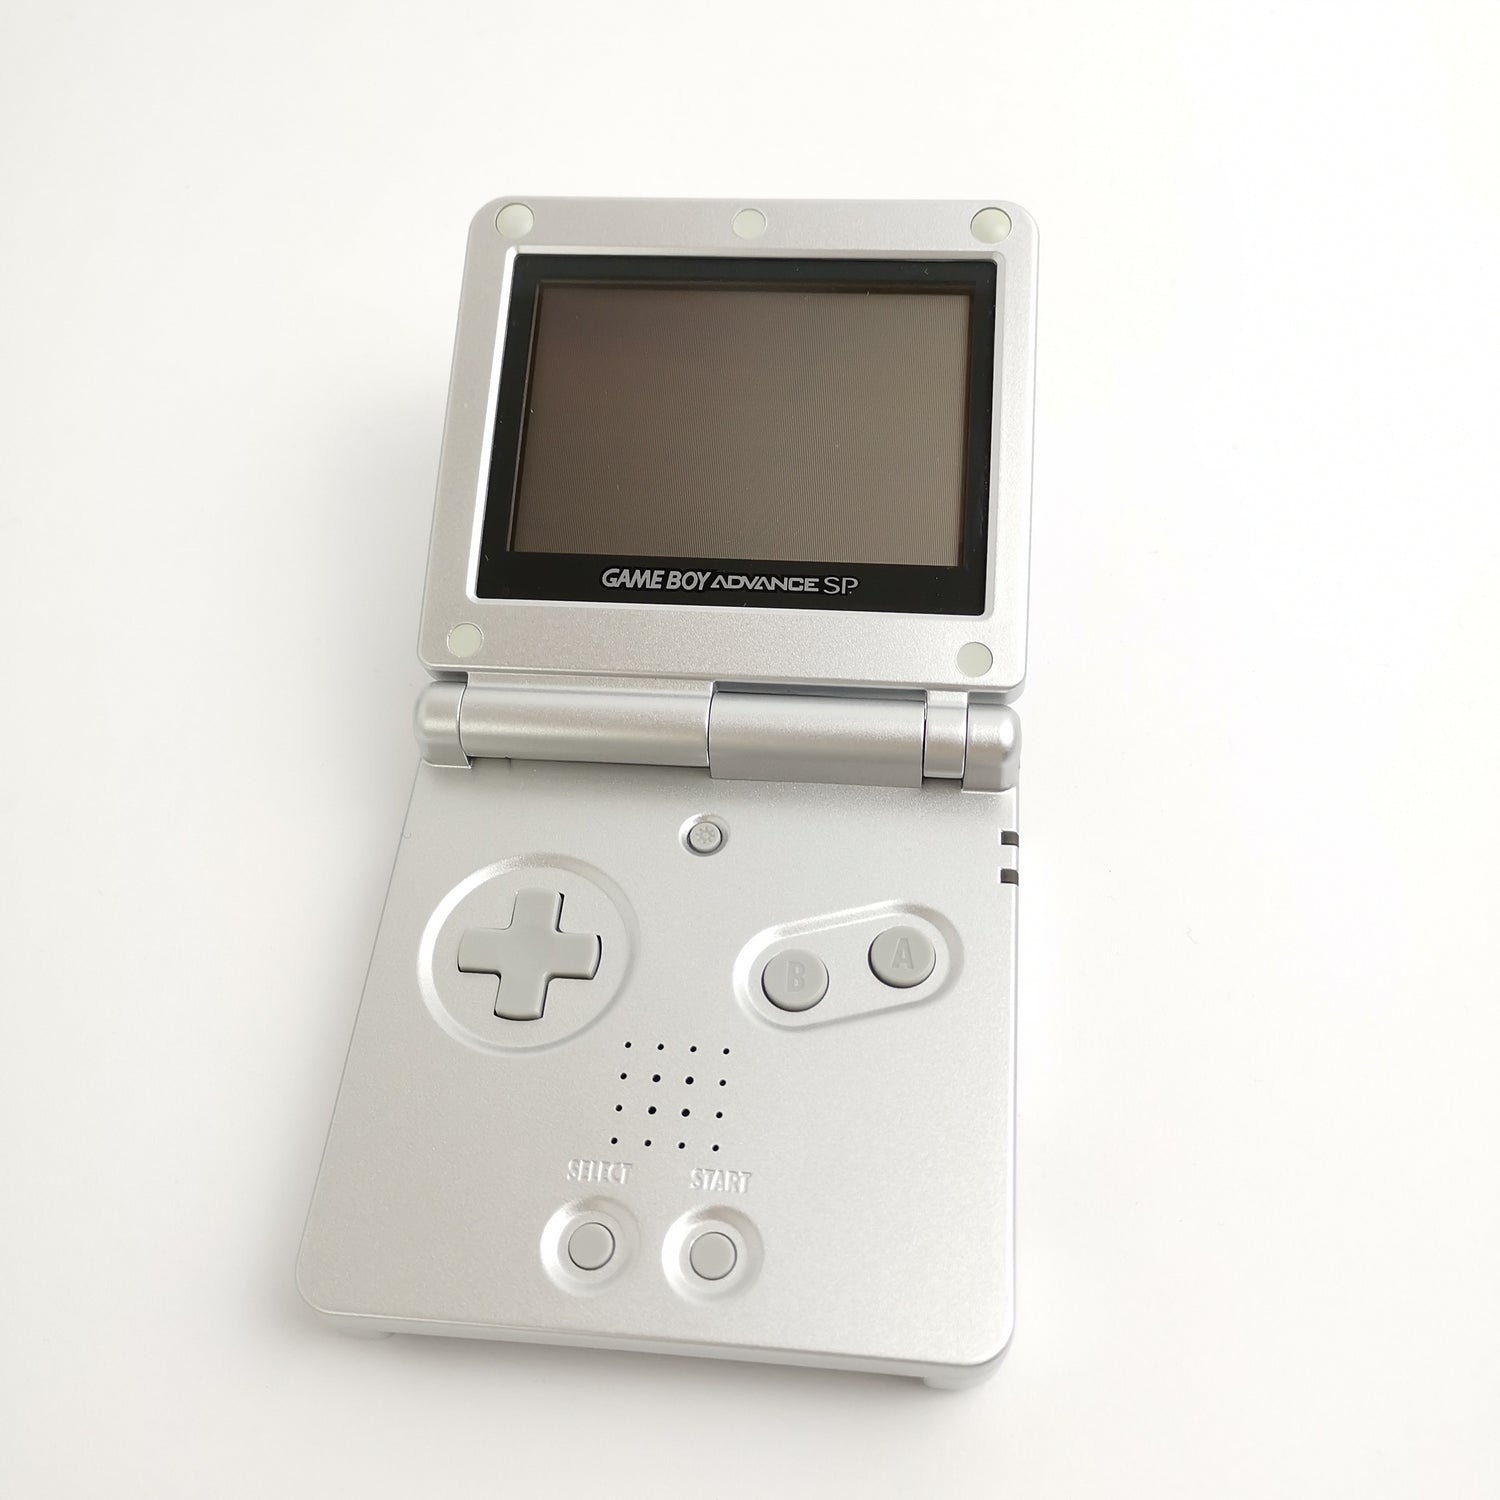 Nintendo Game Boy Advance SP Konsole / Console - Silber Silver in OVP PAL AGS001